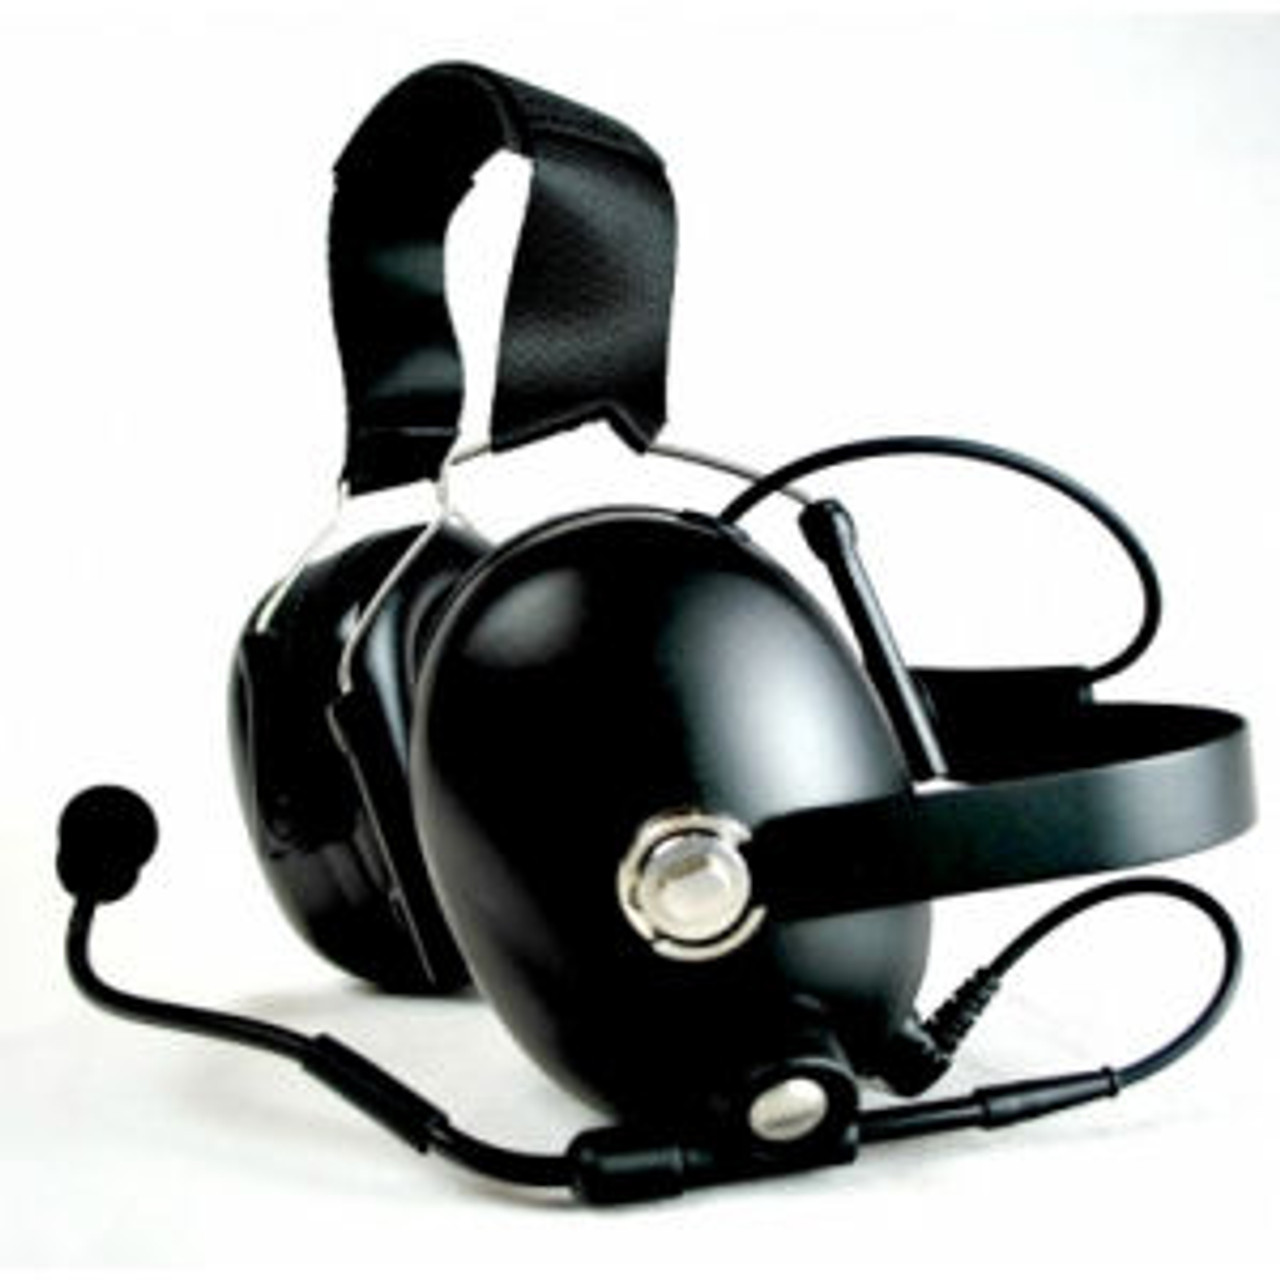 M/A-Com OpenSky P800 Noise Canceling Double Muff Behind The Head Headset